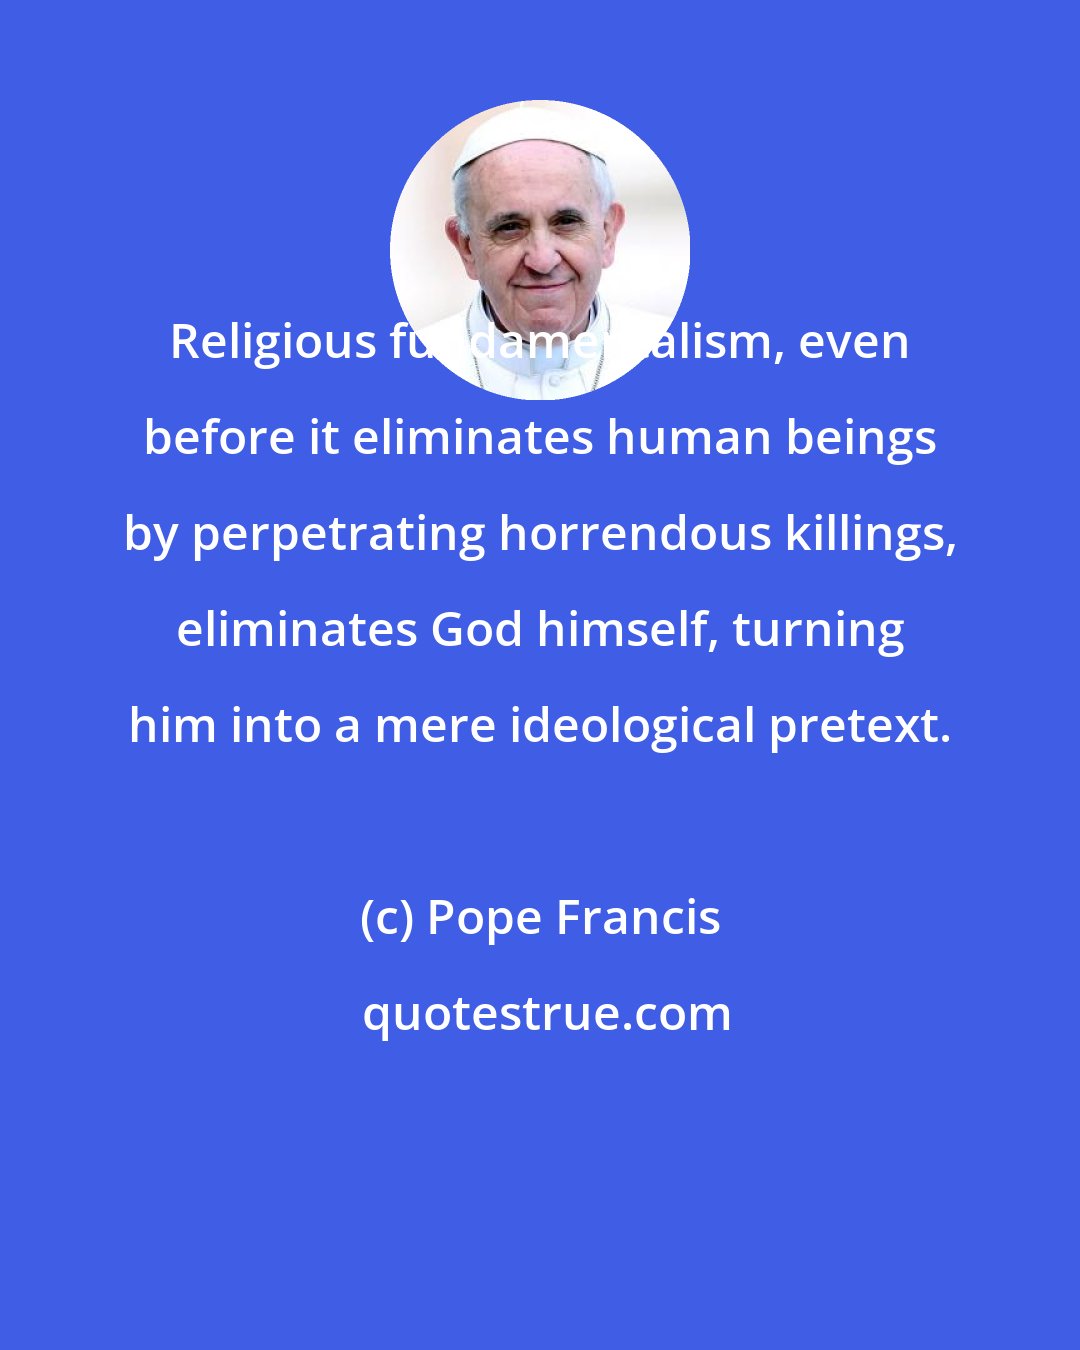 Pope Francis: Religious fundamentalism, even before it eliminates human beings by perpetrating horrendous killings, eliminates God himself, turning him into a mere ideological pretext.